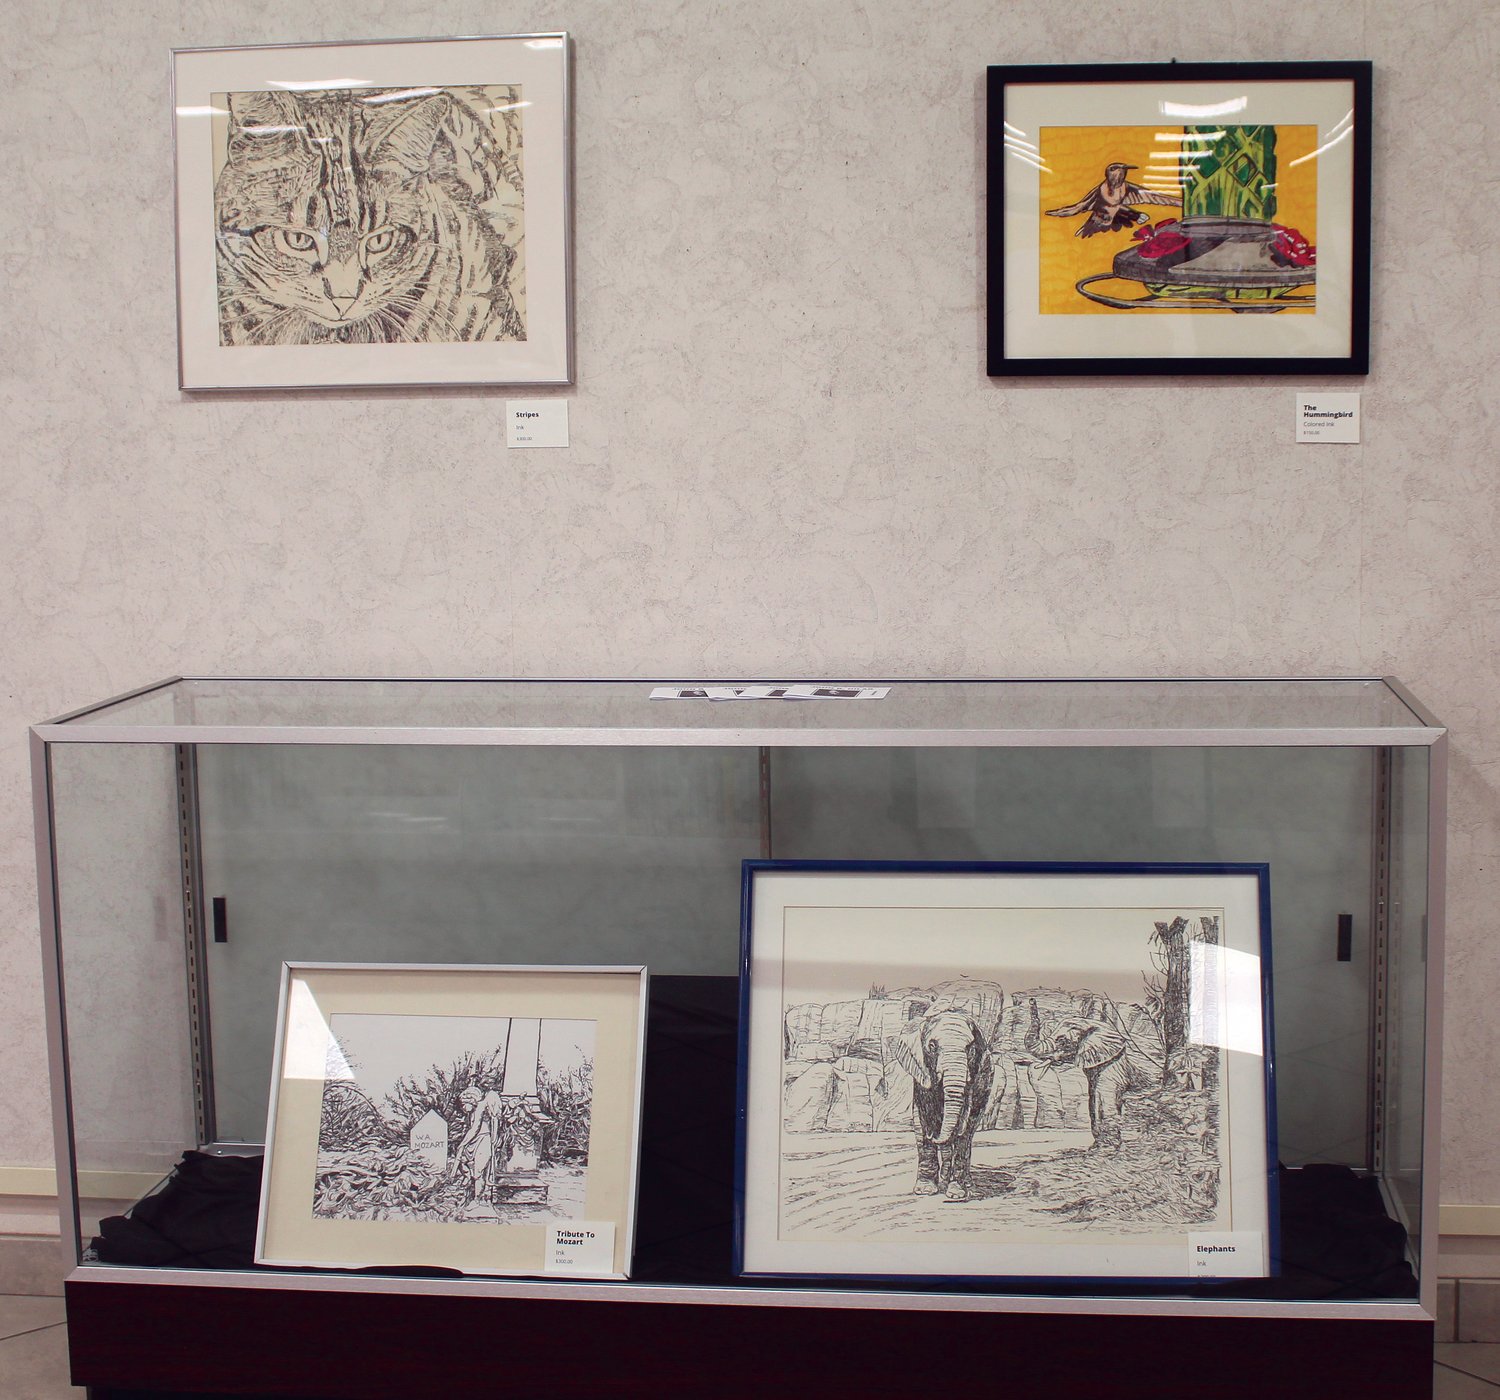 The works of John R. Oilar are on display now through mid-August during normal business hours at the CDPL. Oilar is known for his renderings of various people and sceneries.